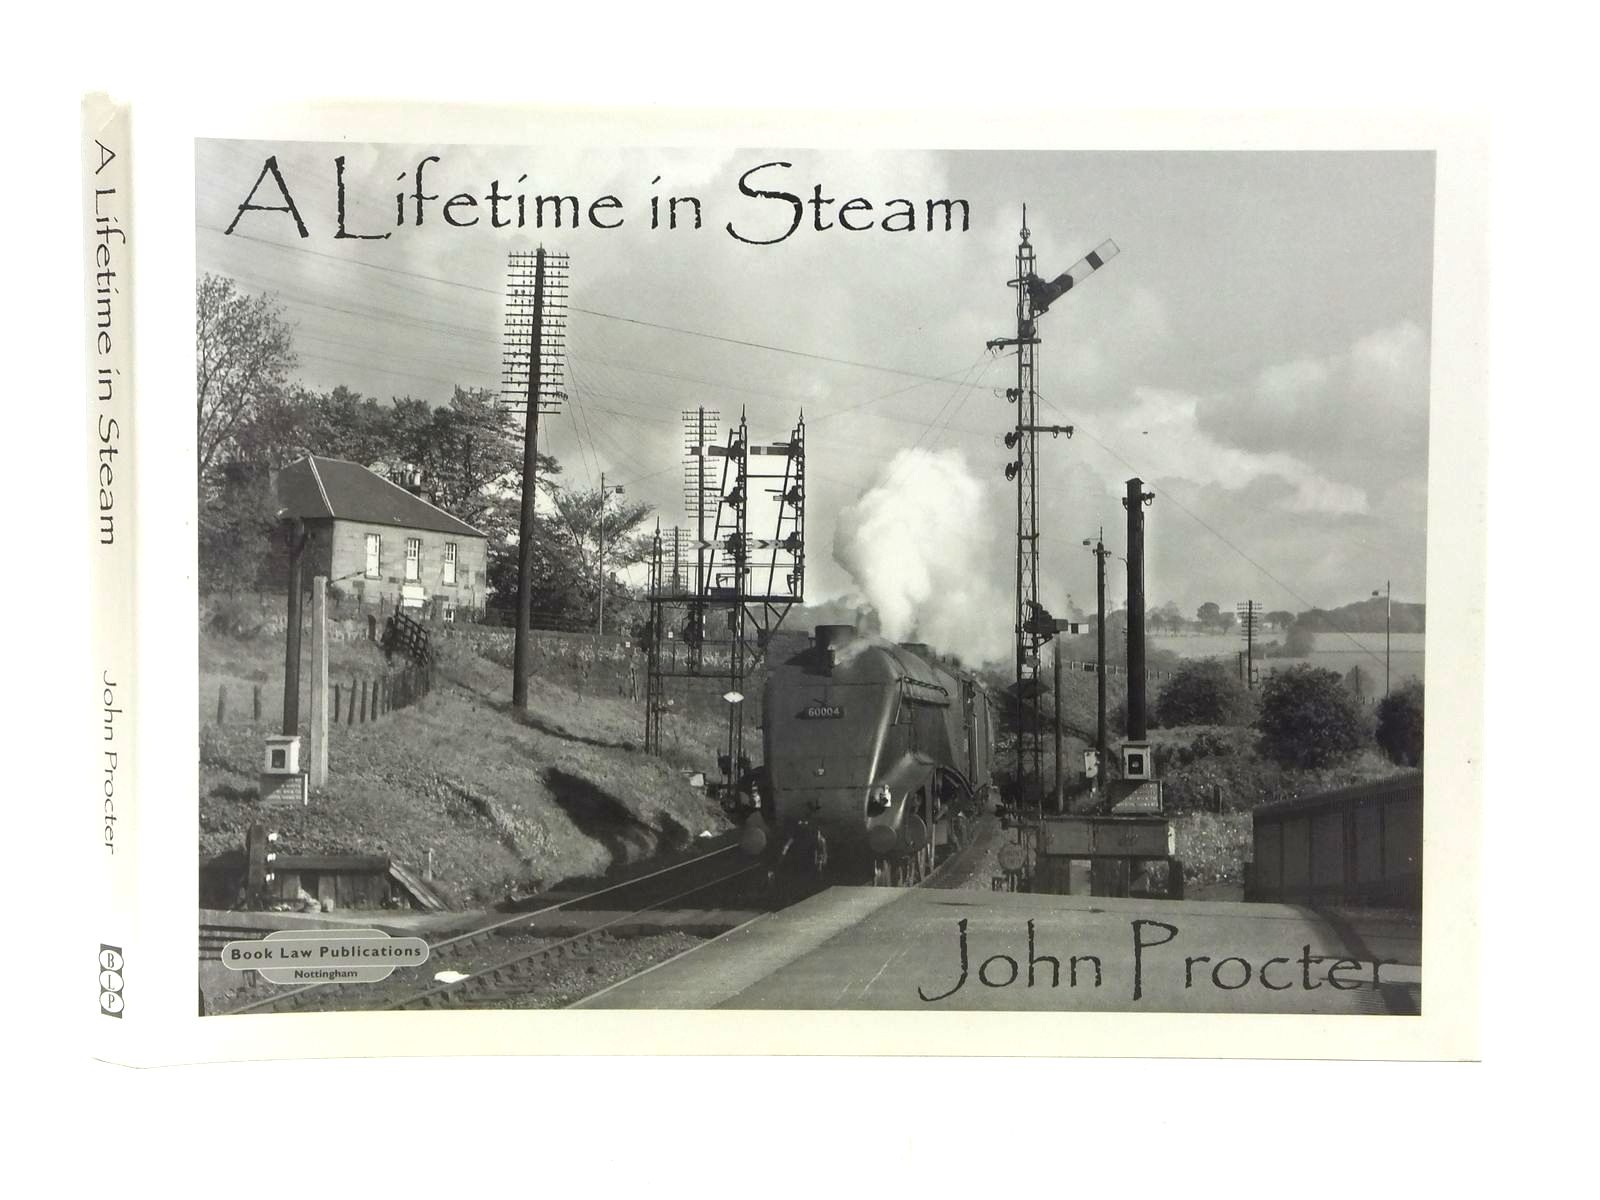 Photo of A LIFETIME IN STEAM written by Procter, John published by Book Law Publications (STOCK CODE: 2118806)  for sale by Stella & Rose's Books